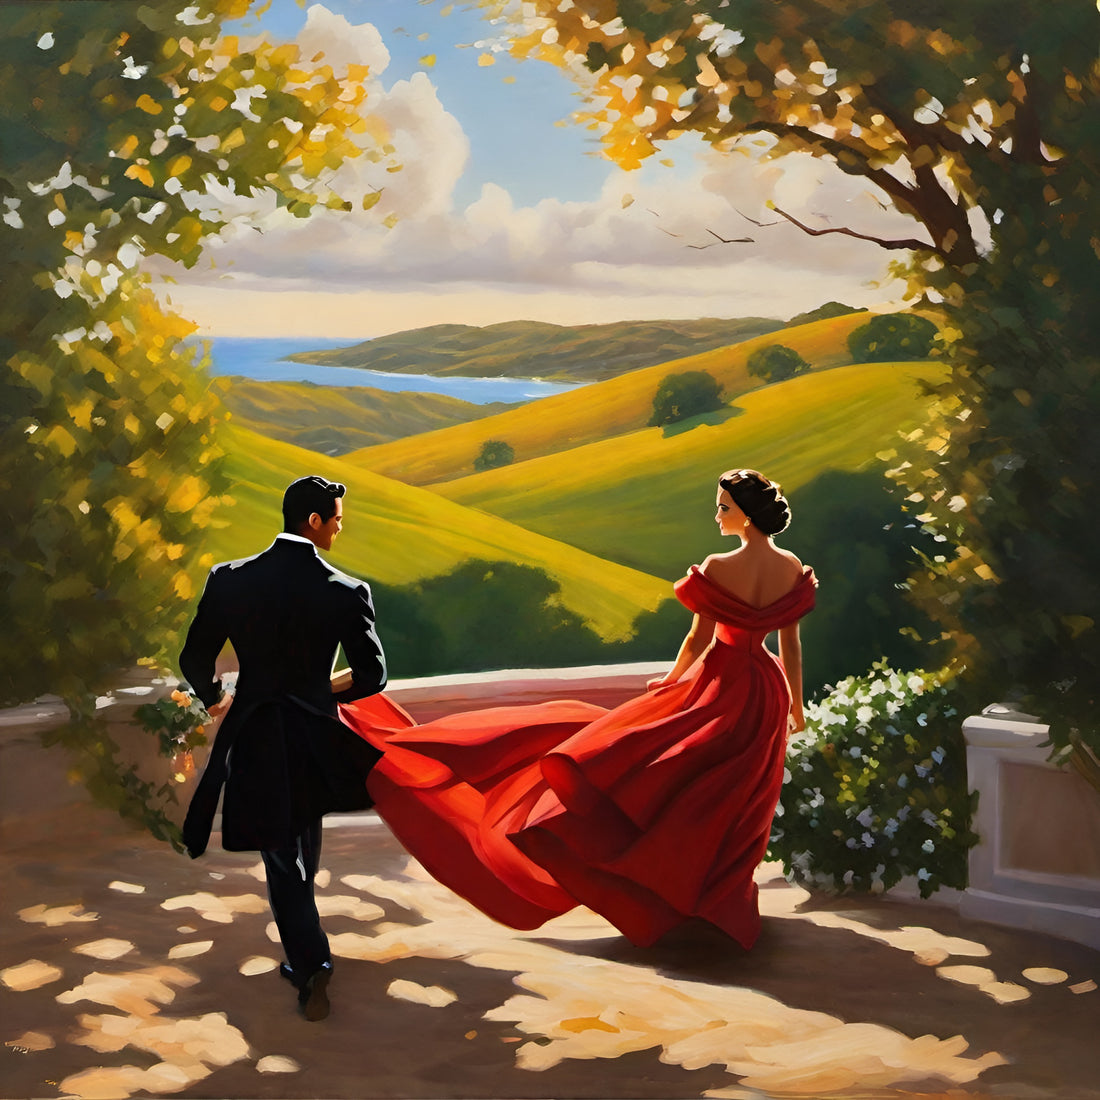 Man and woman standing together, reminiscent of Scarlett O'Hara and Rhett Butler, against a breathtaking backdrop inspired by Gone with the Wind.